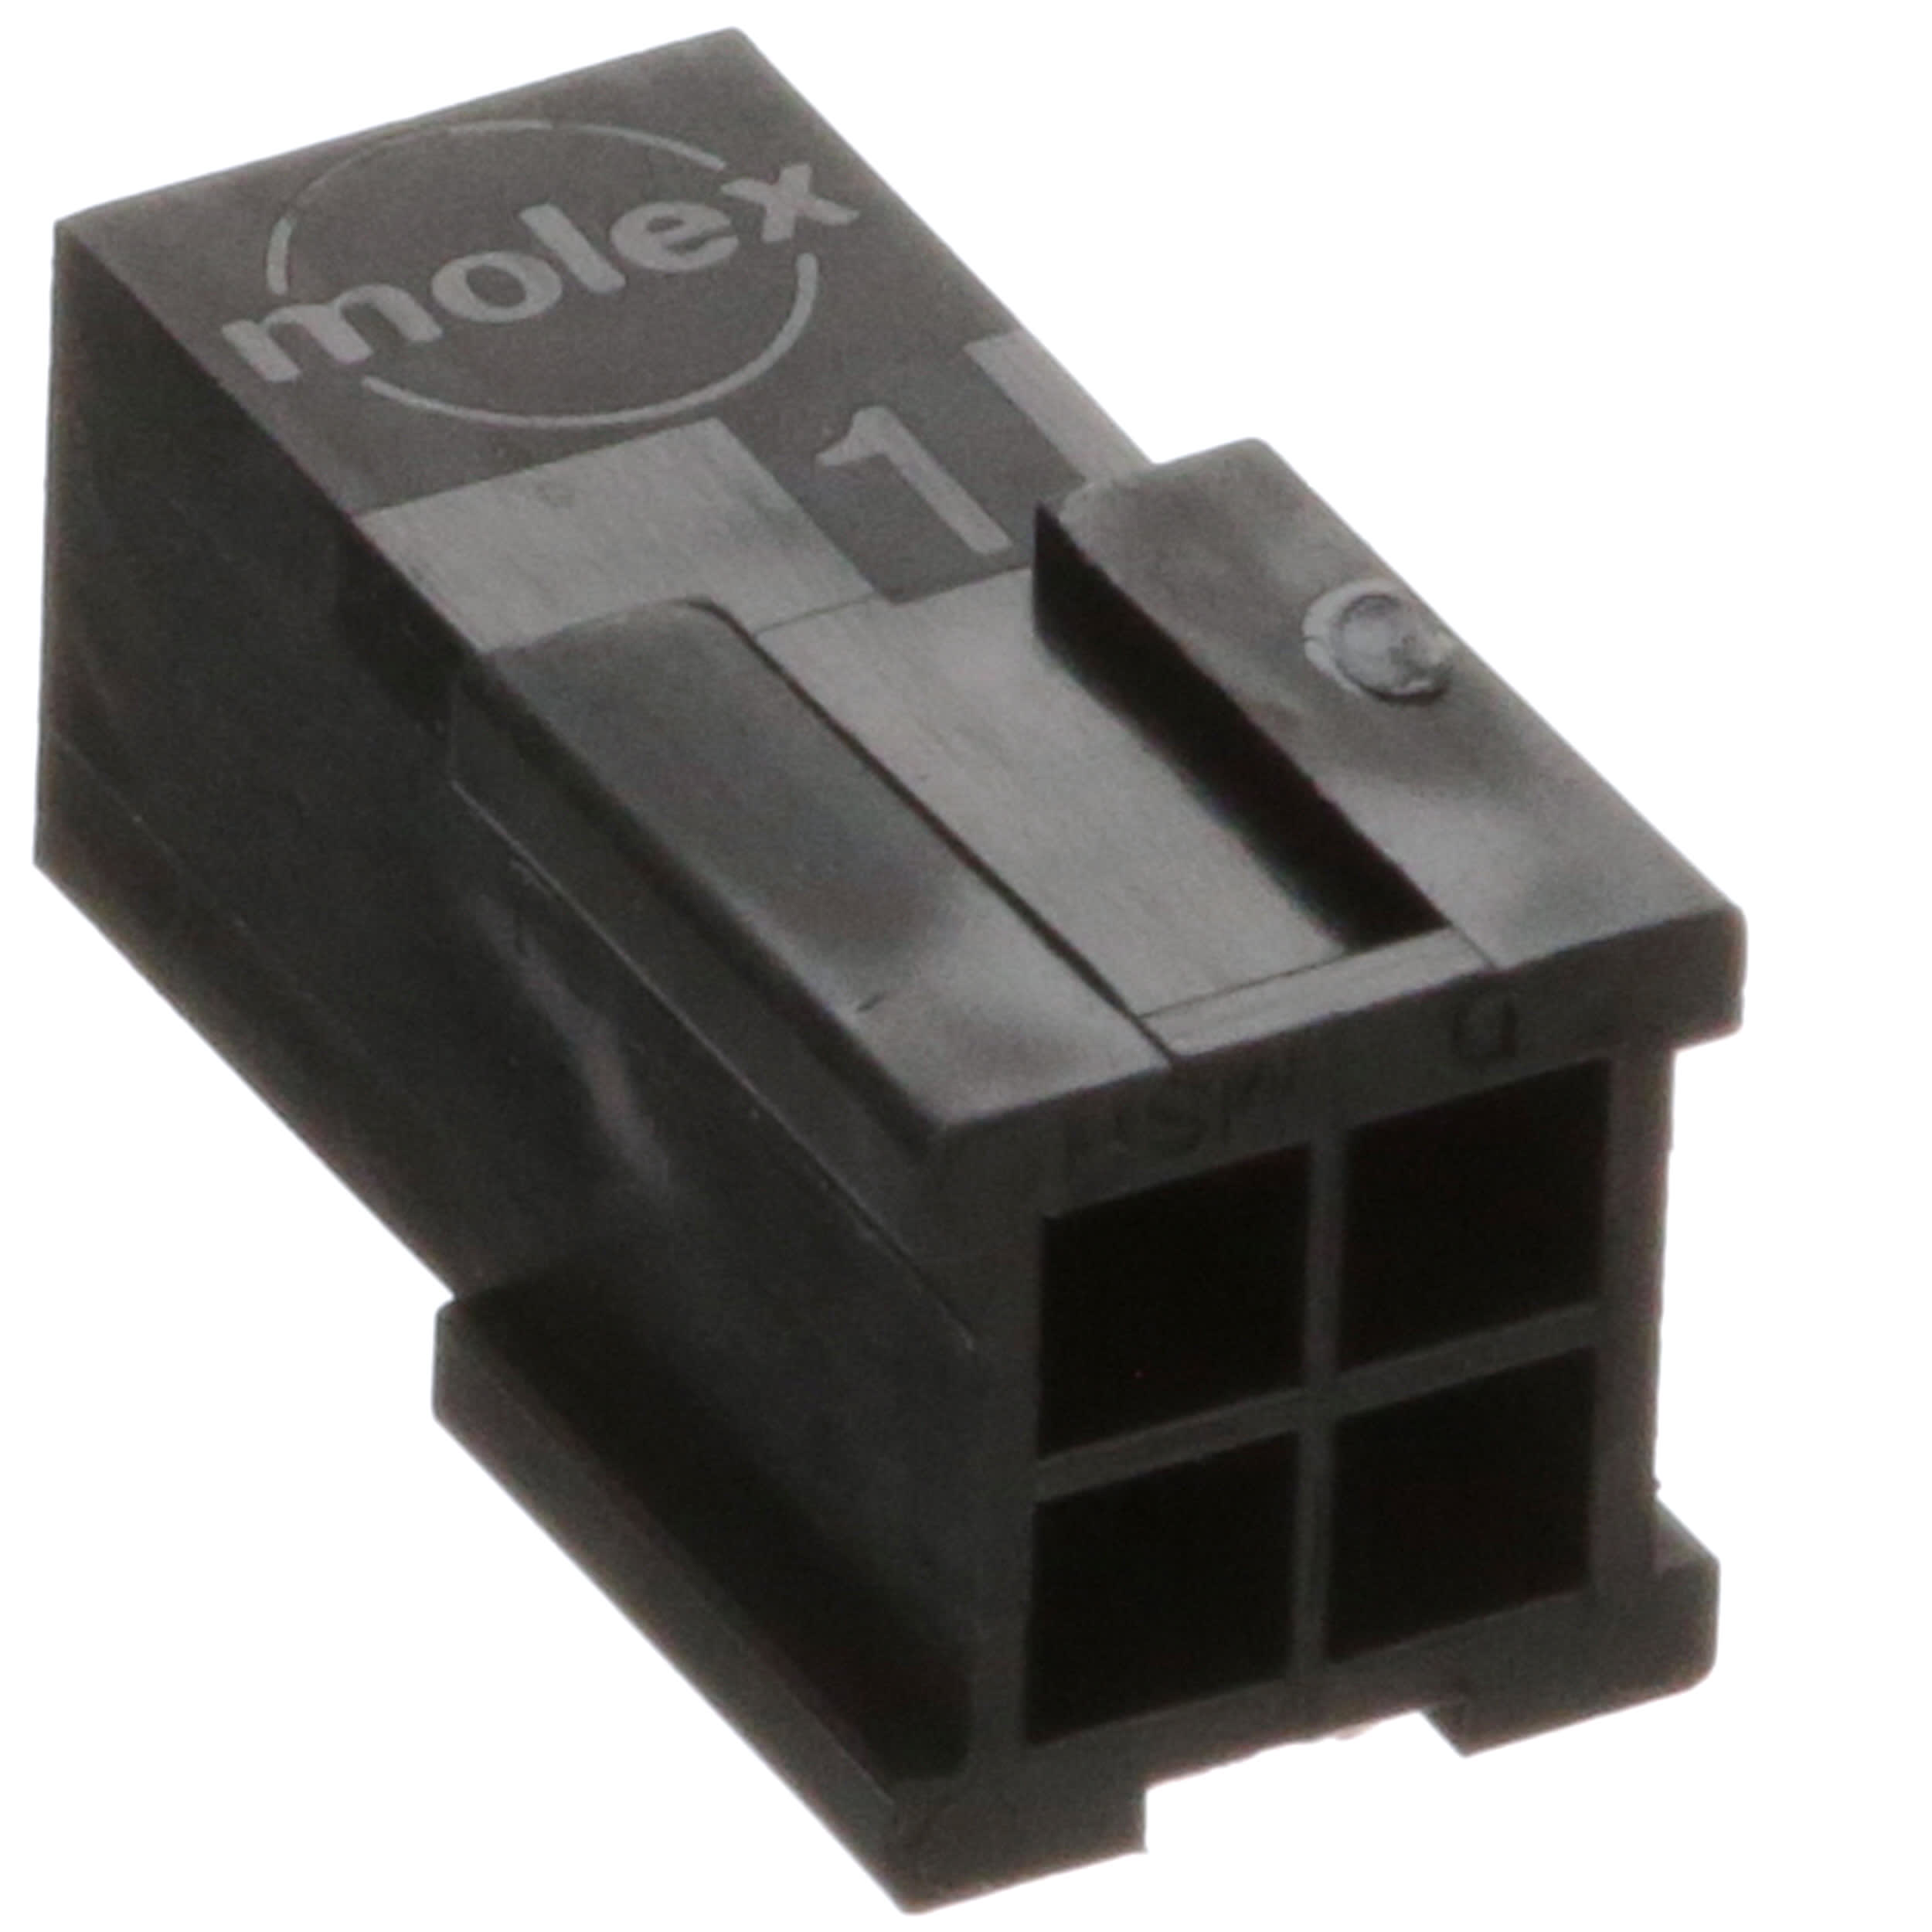 Molex 43020-0401 Micro-Fit Male Receptacle Plug 4 Position 10 Lot of